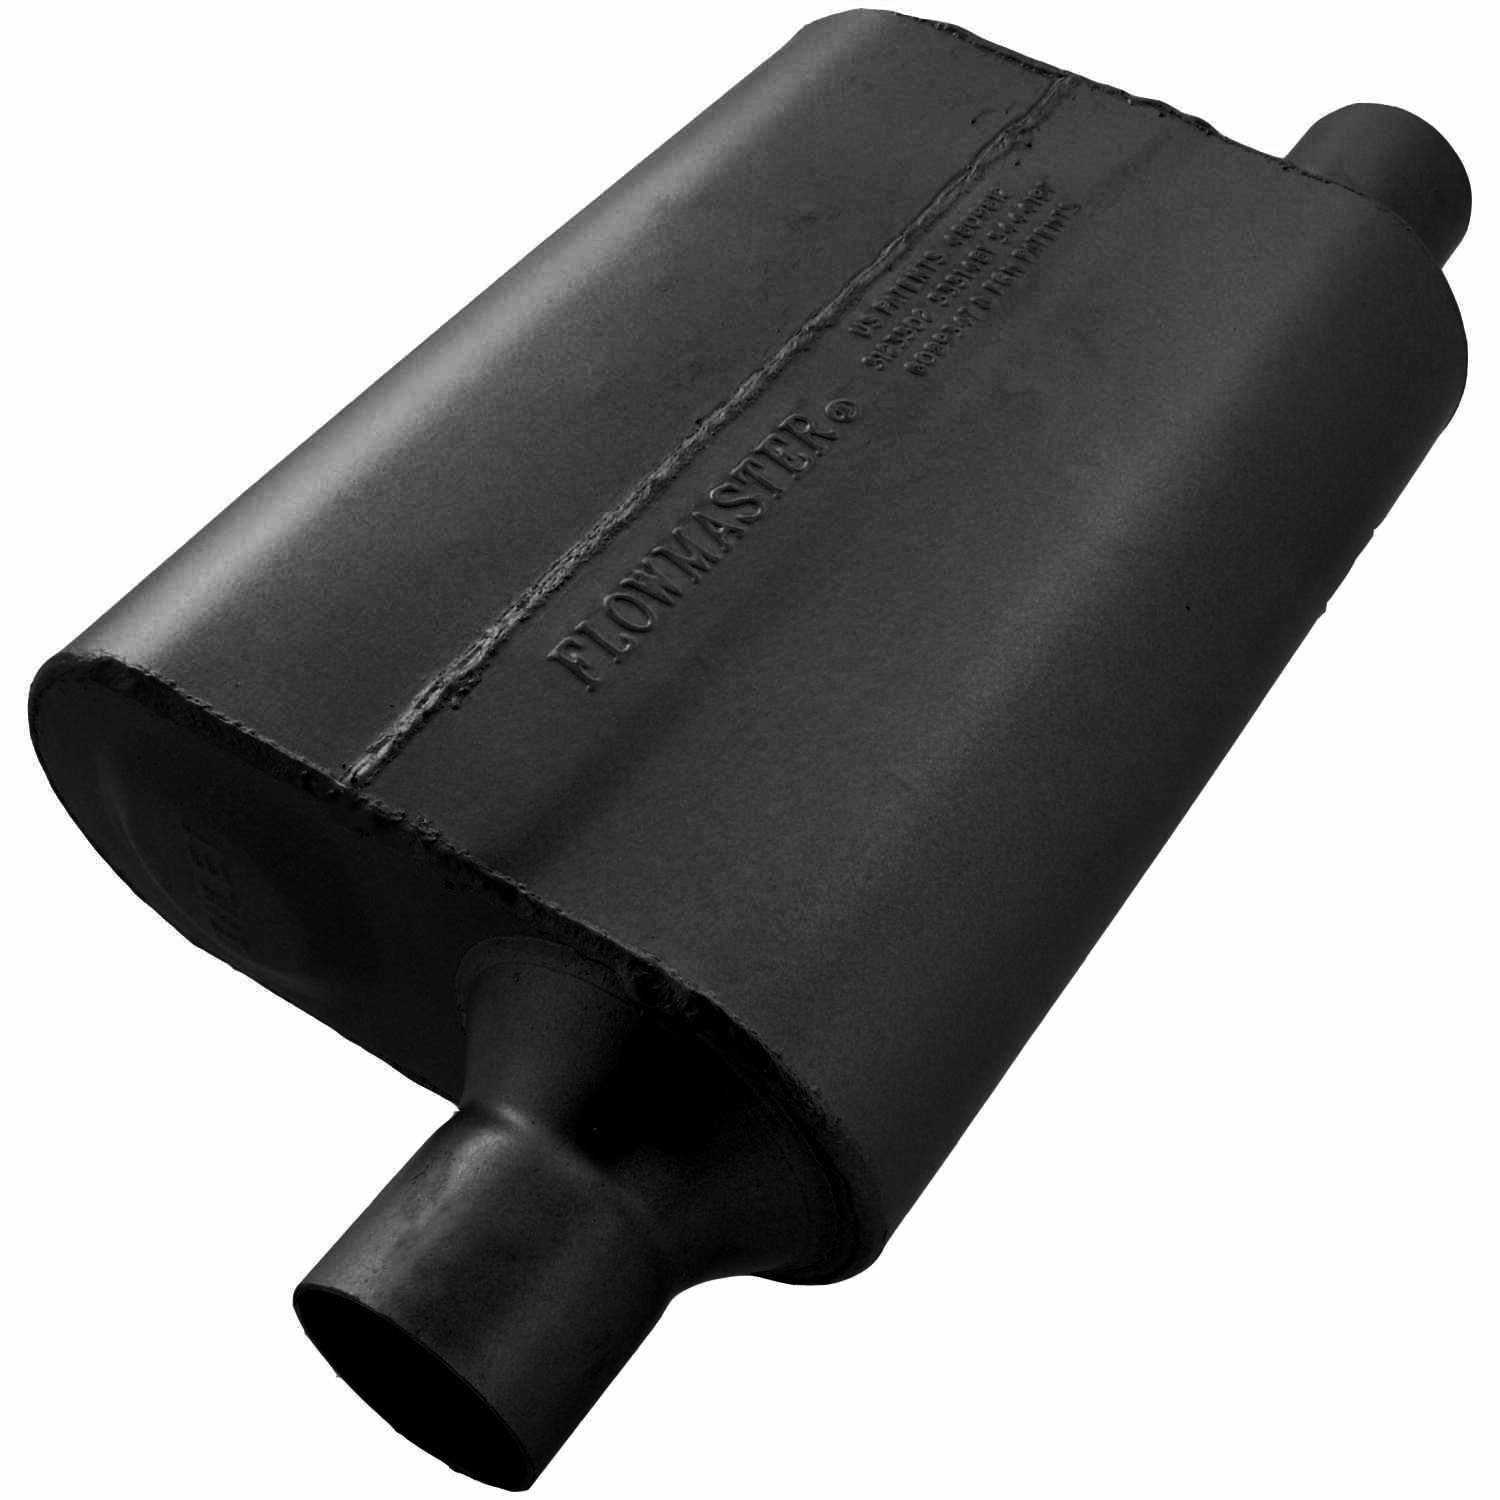 40 Series Delta Flow Muffler Same Side Offset In/Out: 2.25"